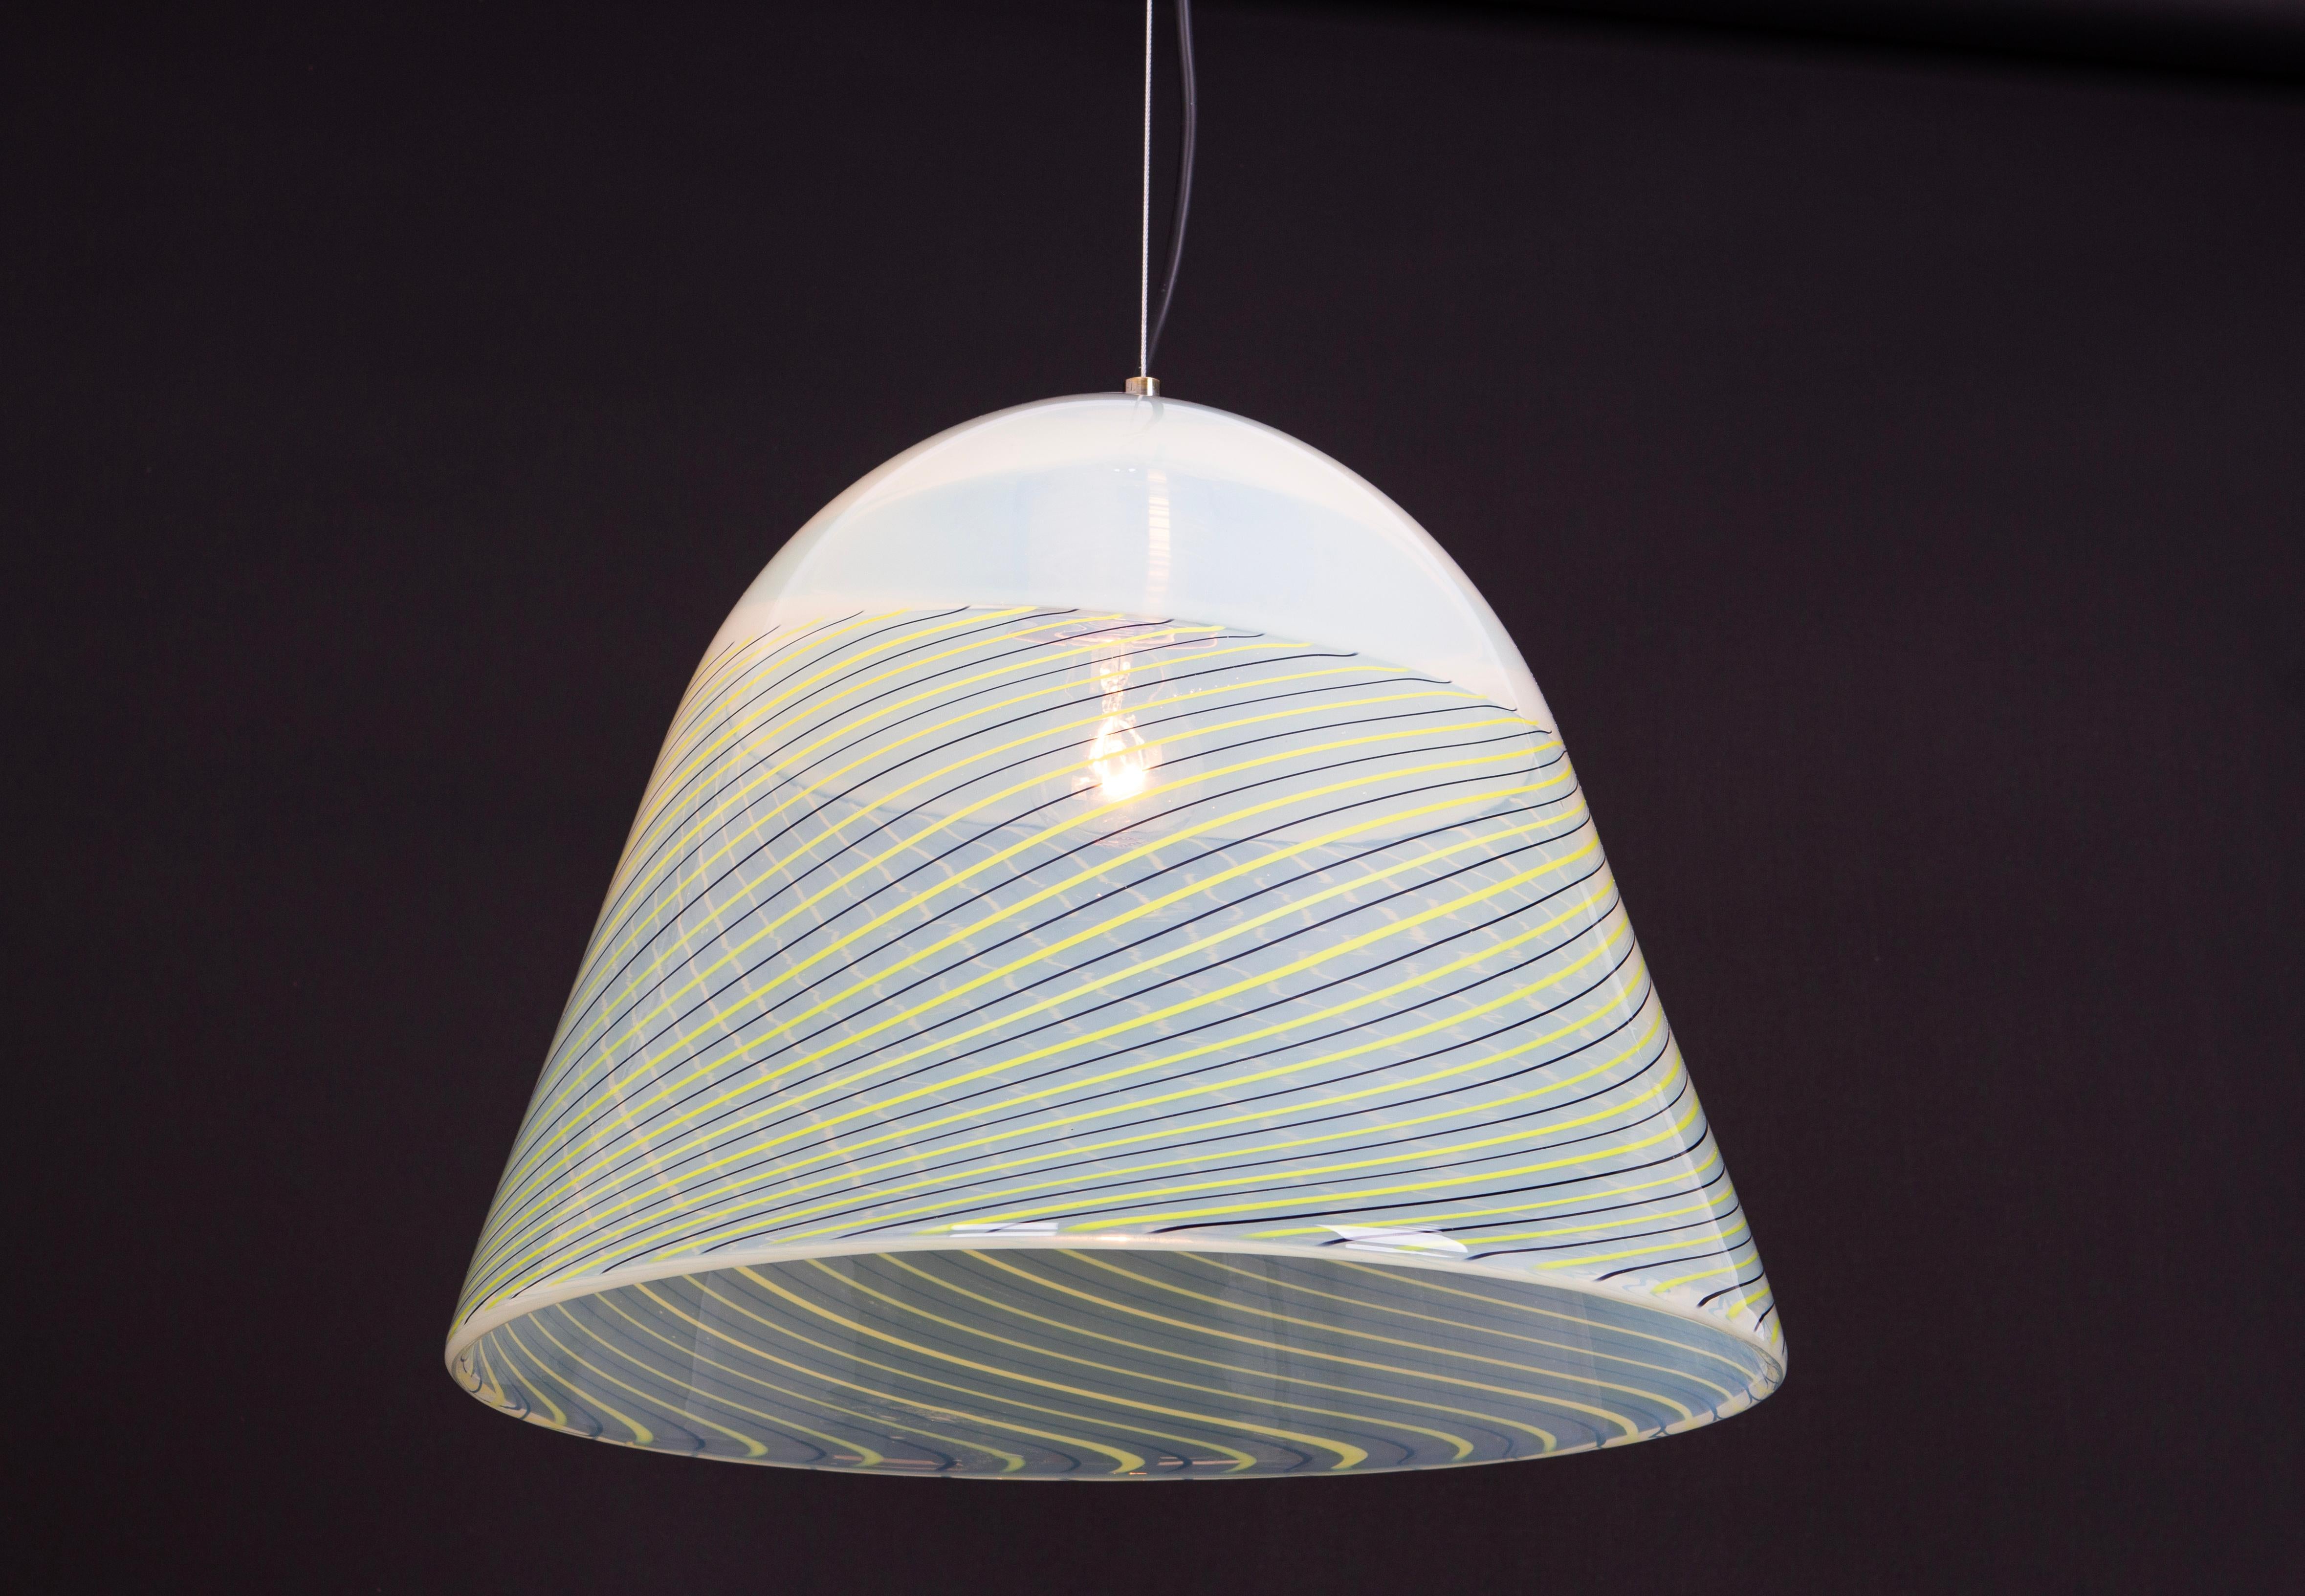 Large Pendant Light in style of Kalmar-Fazzoletto, Italy, 1970s For Sale 5